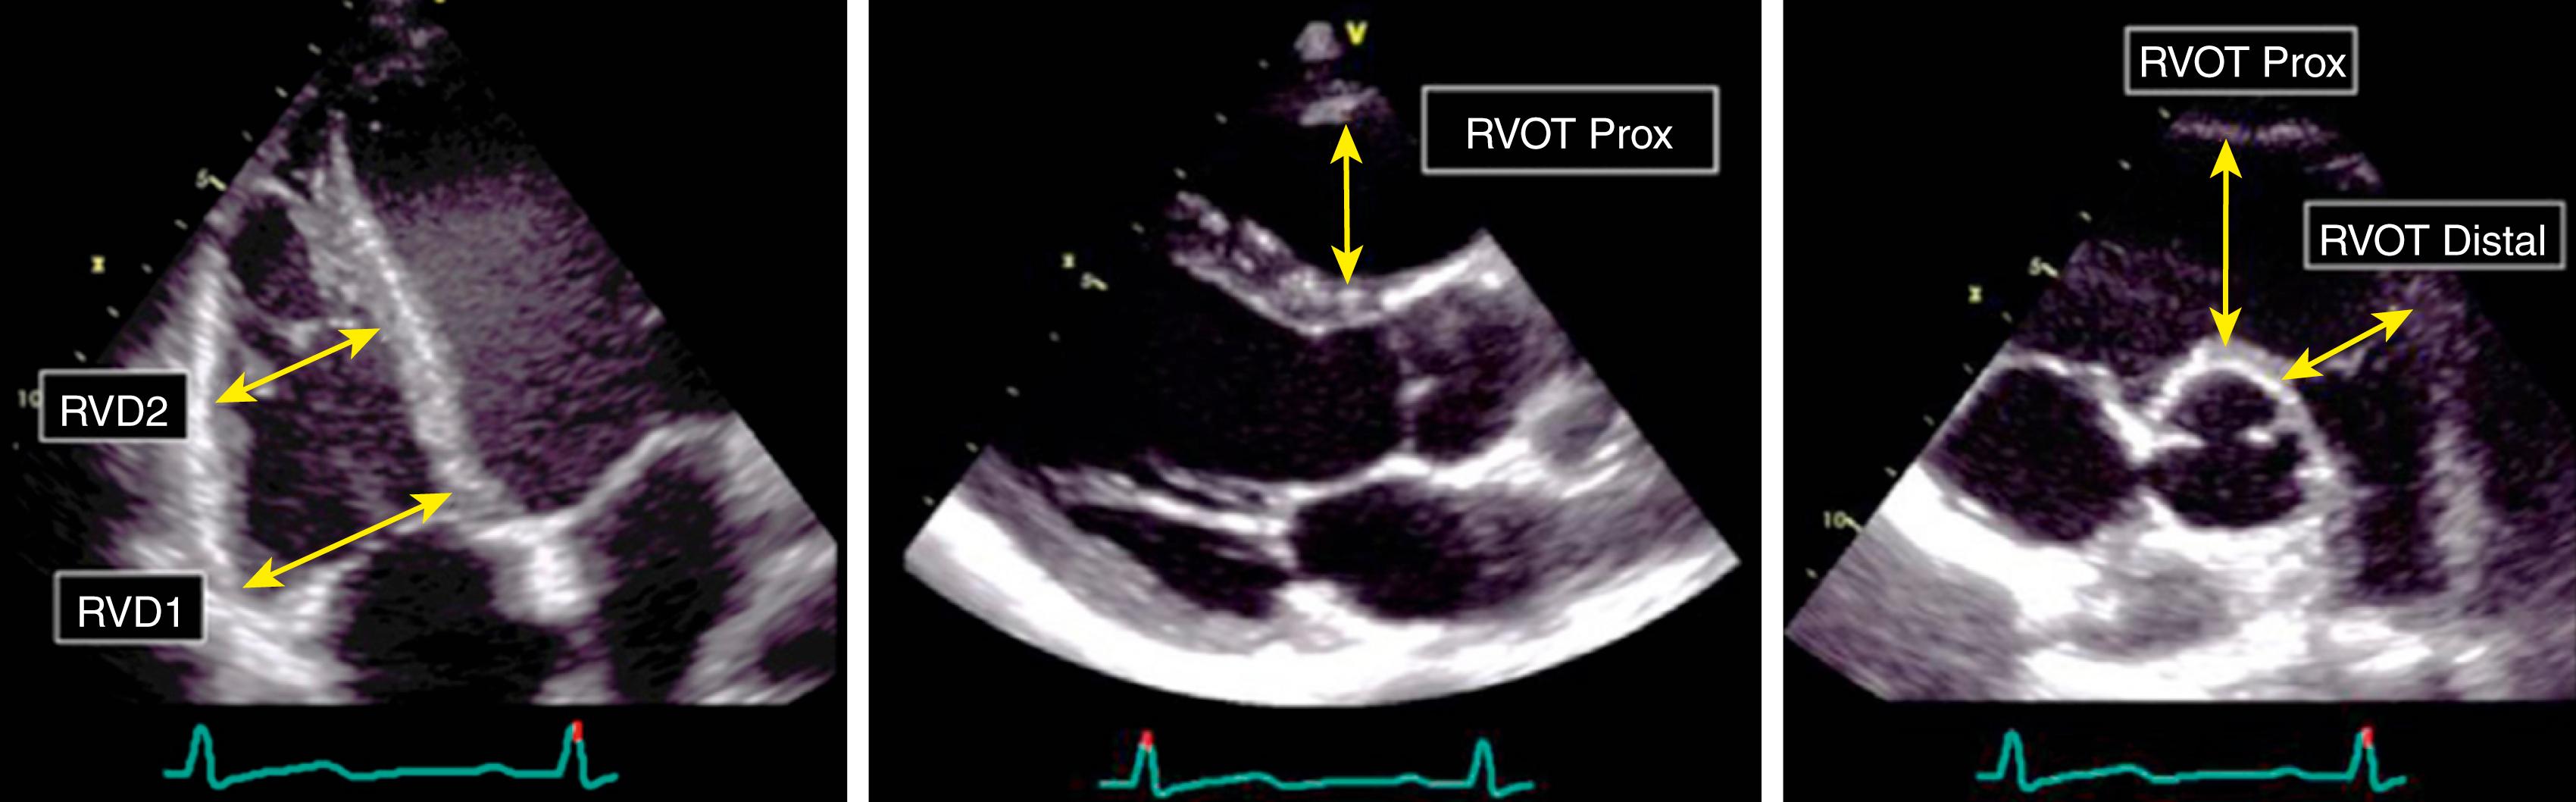 Figure 30.2, Right ventricular dimensions demonstrated from the right ventricle–focused view, the proximal right ventricular outflow tract (RVOT) from the parasternal long-axis view, and the proximal (Prox) and distal RVOT in the parasternal short-axis view. RVD1, basal RV dimension; RVD2, mid RV dimension.